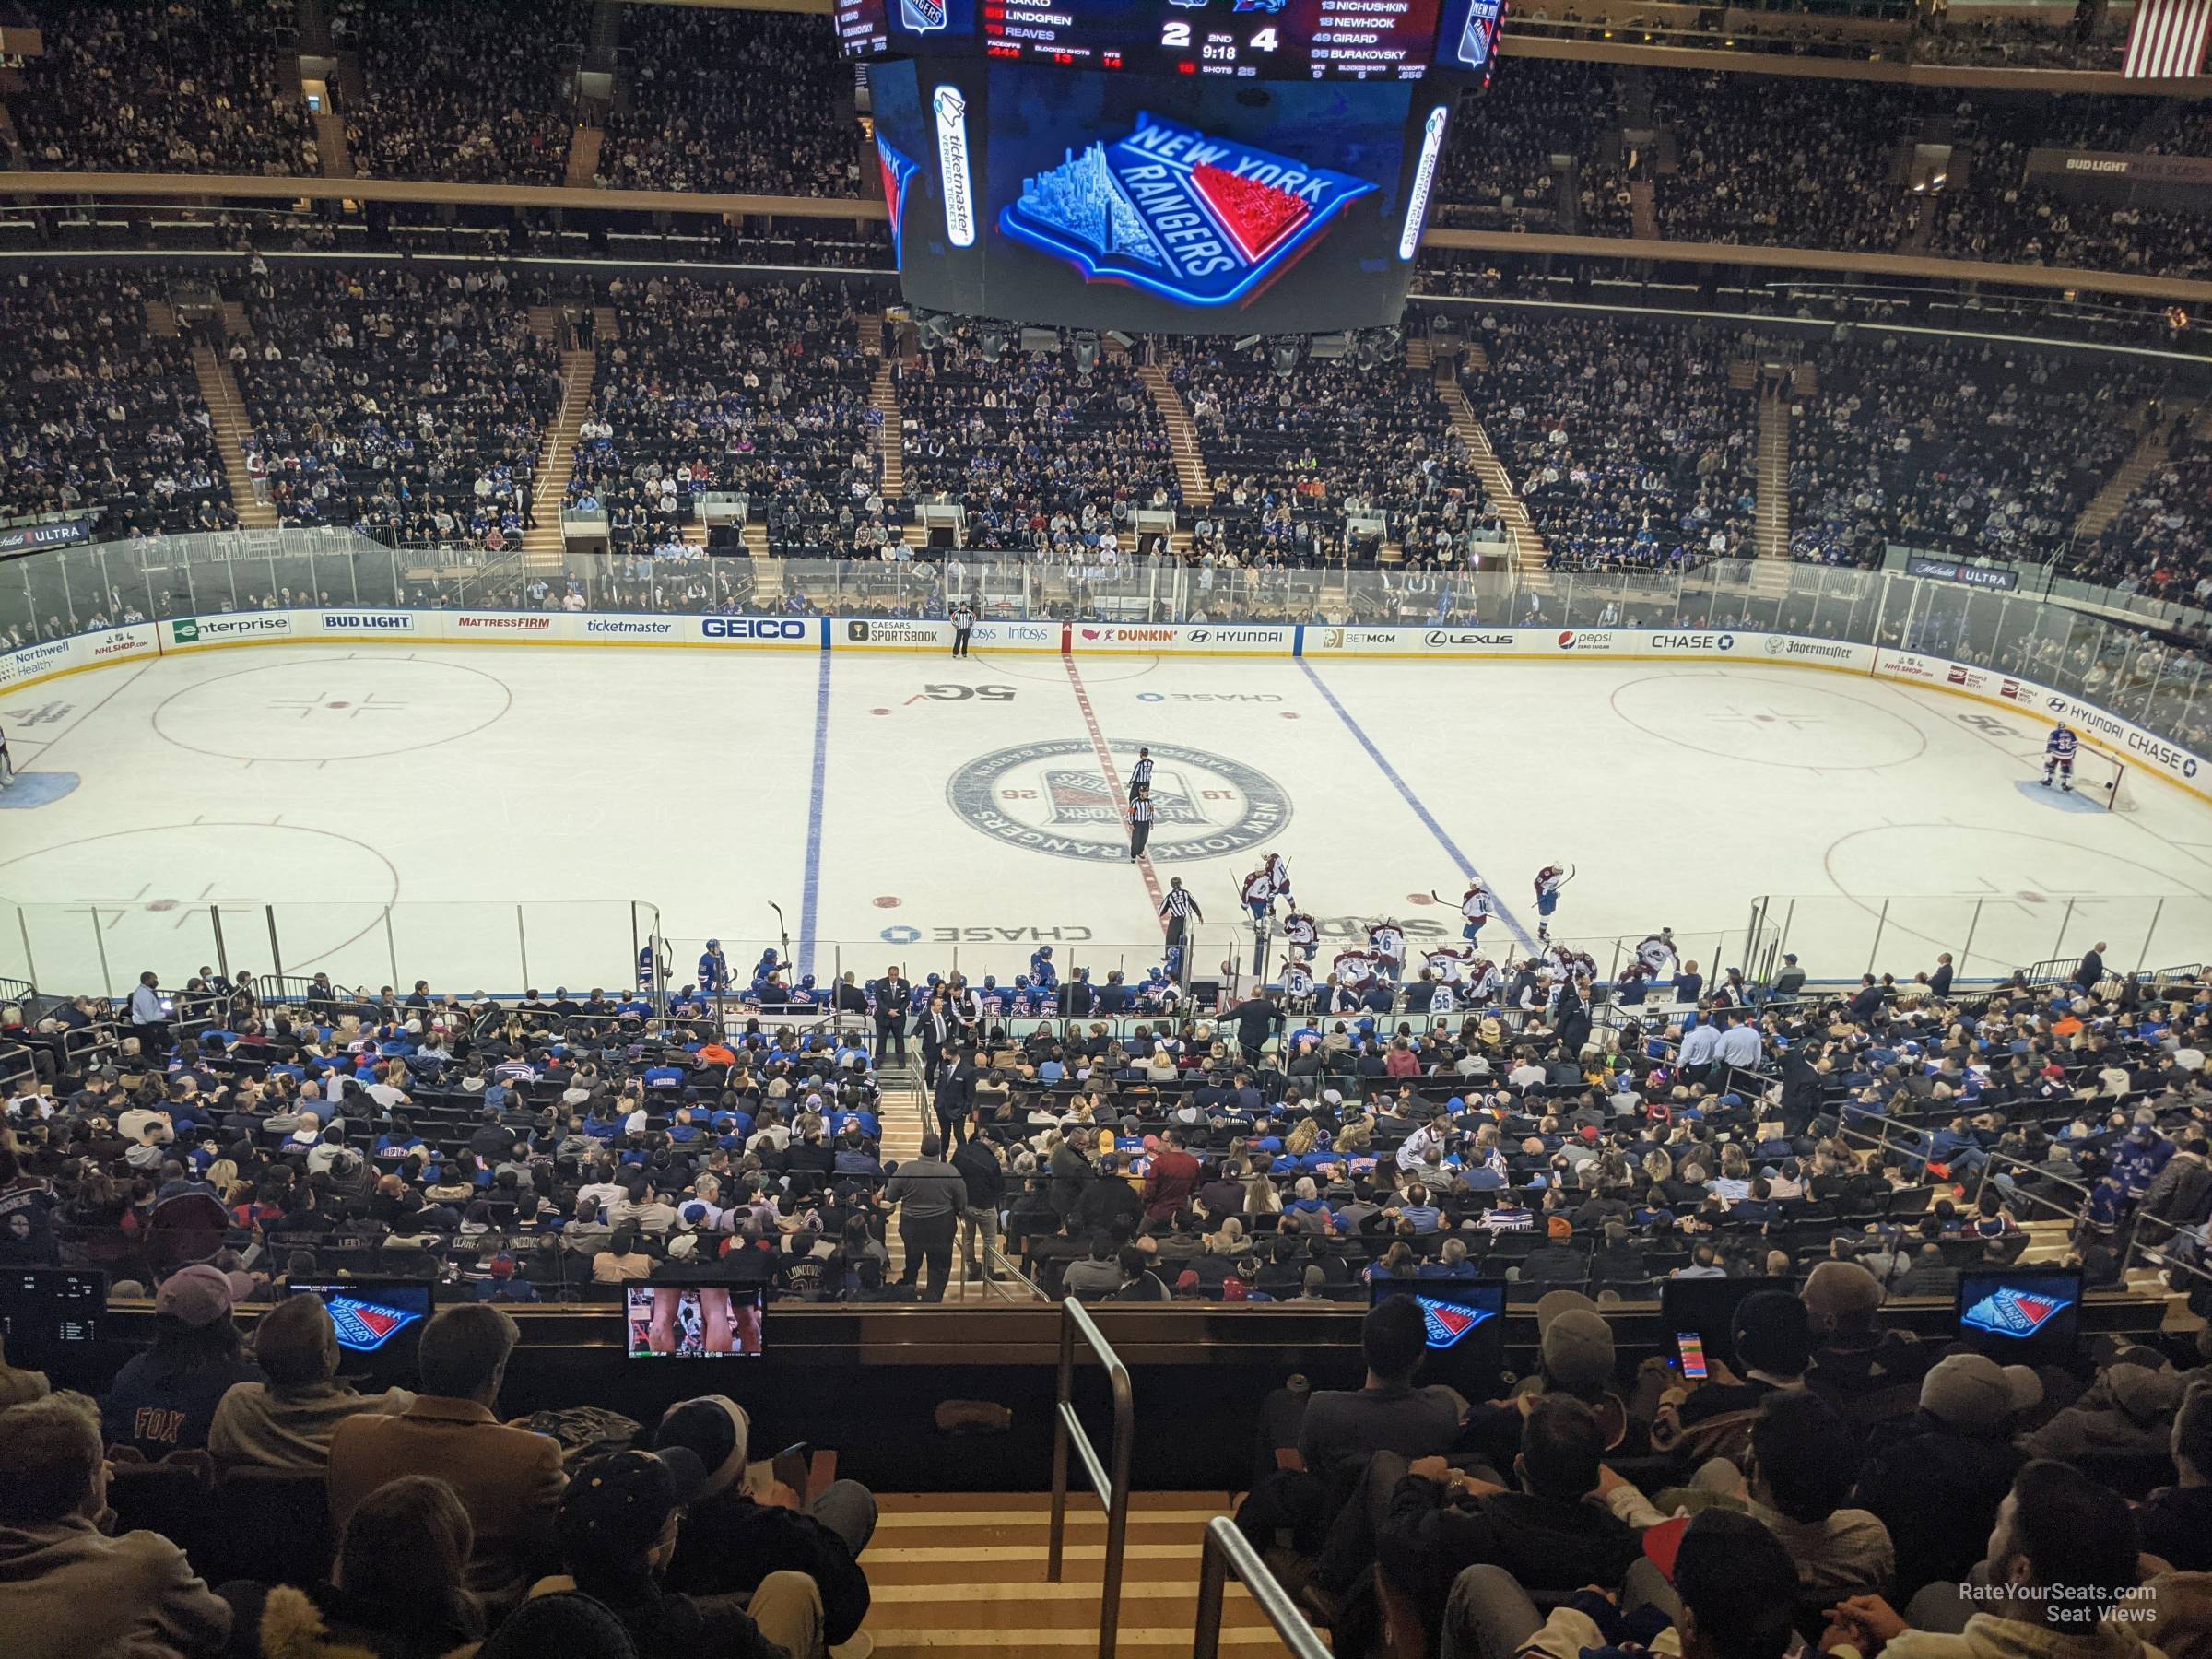 Section 210 at Madison Square Garden